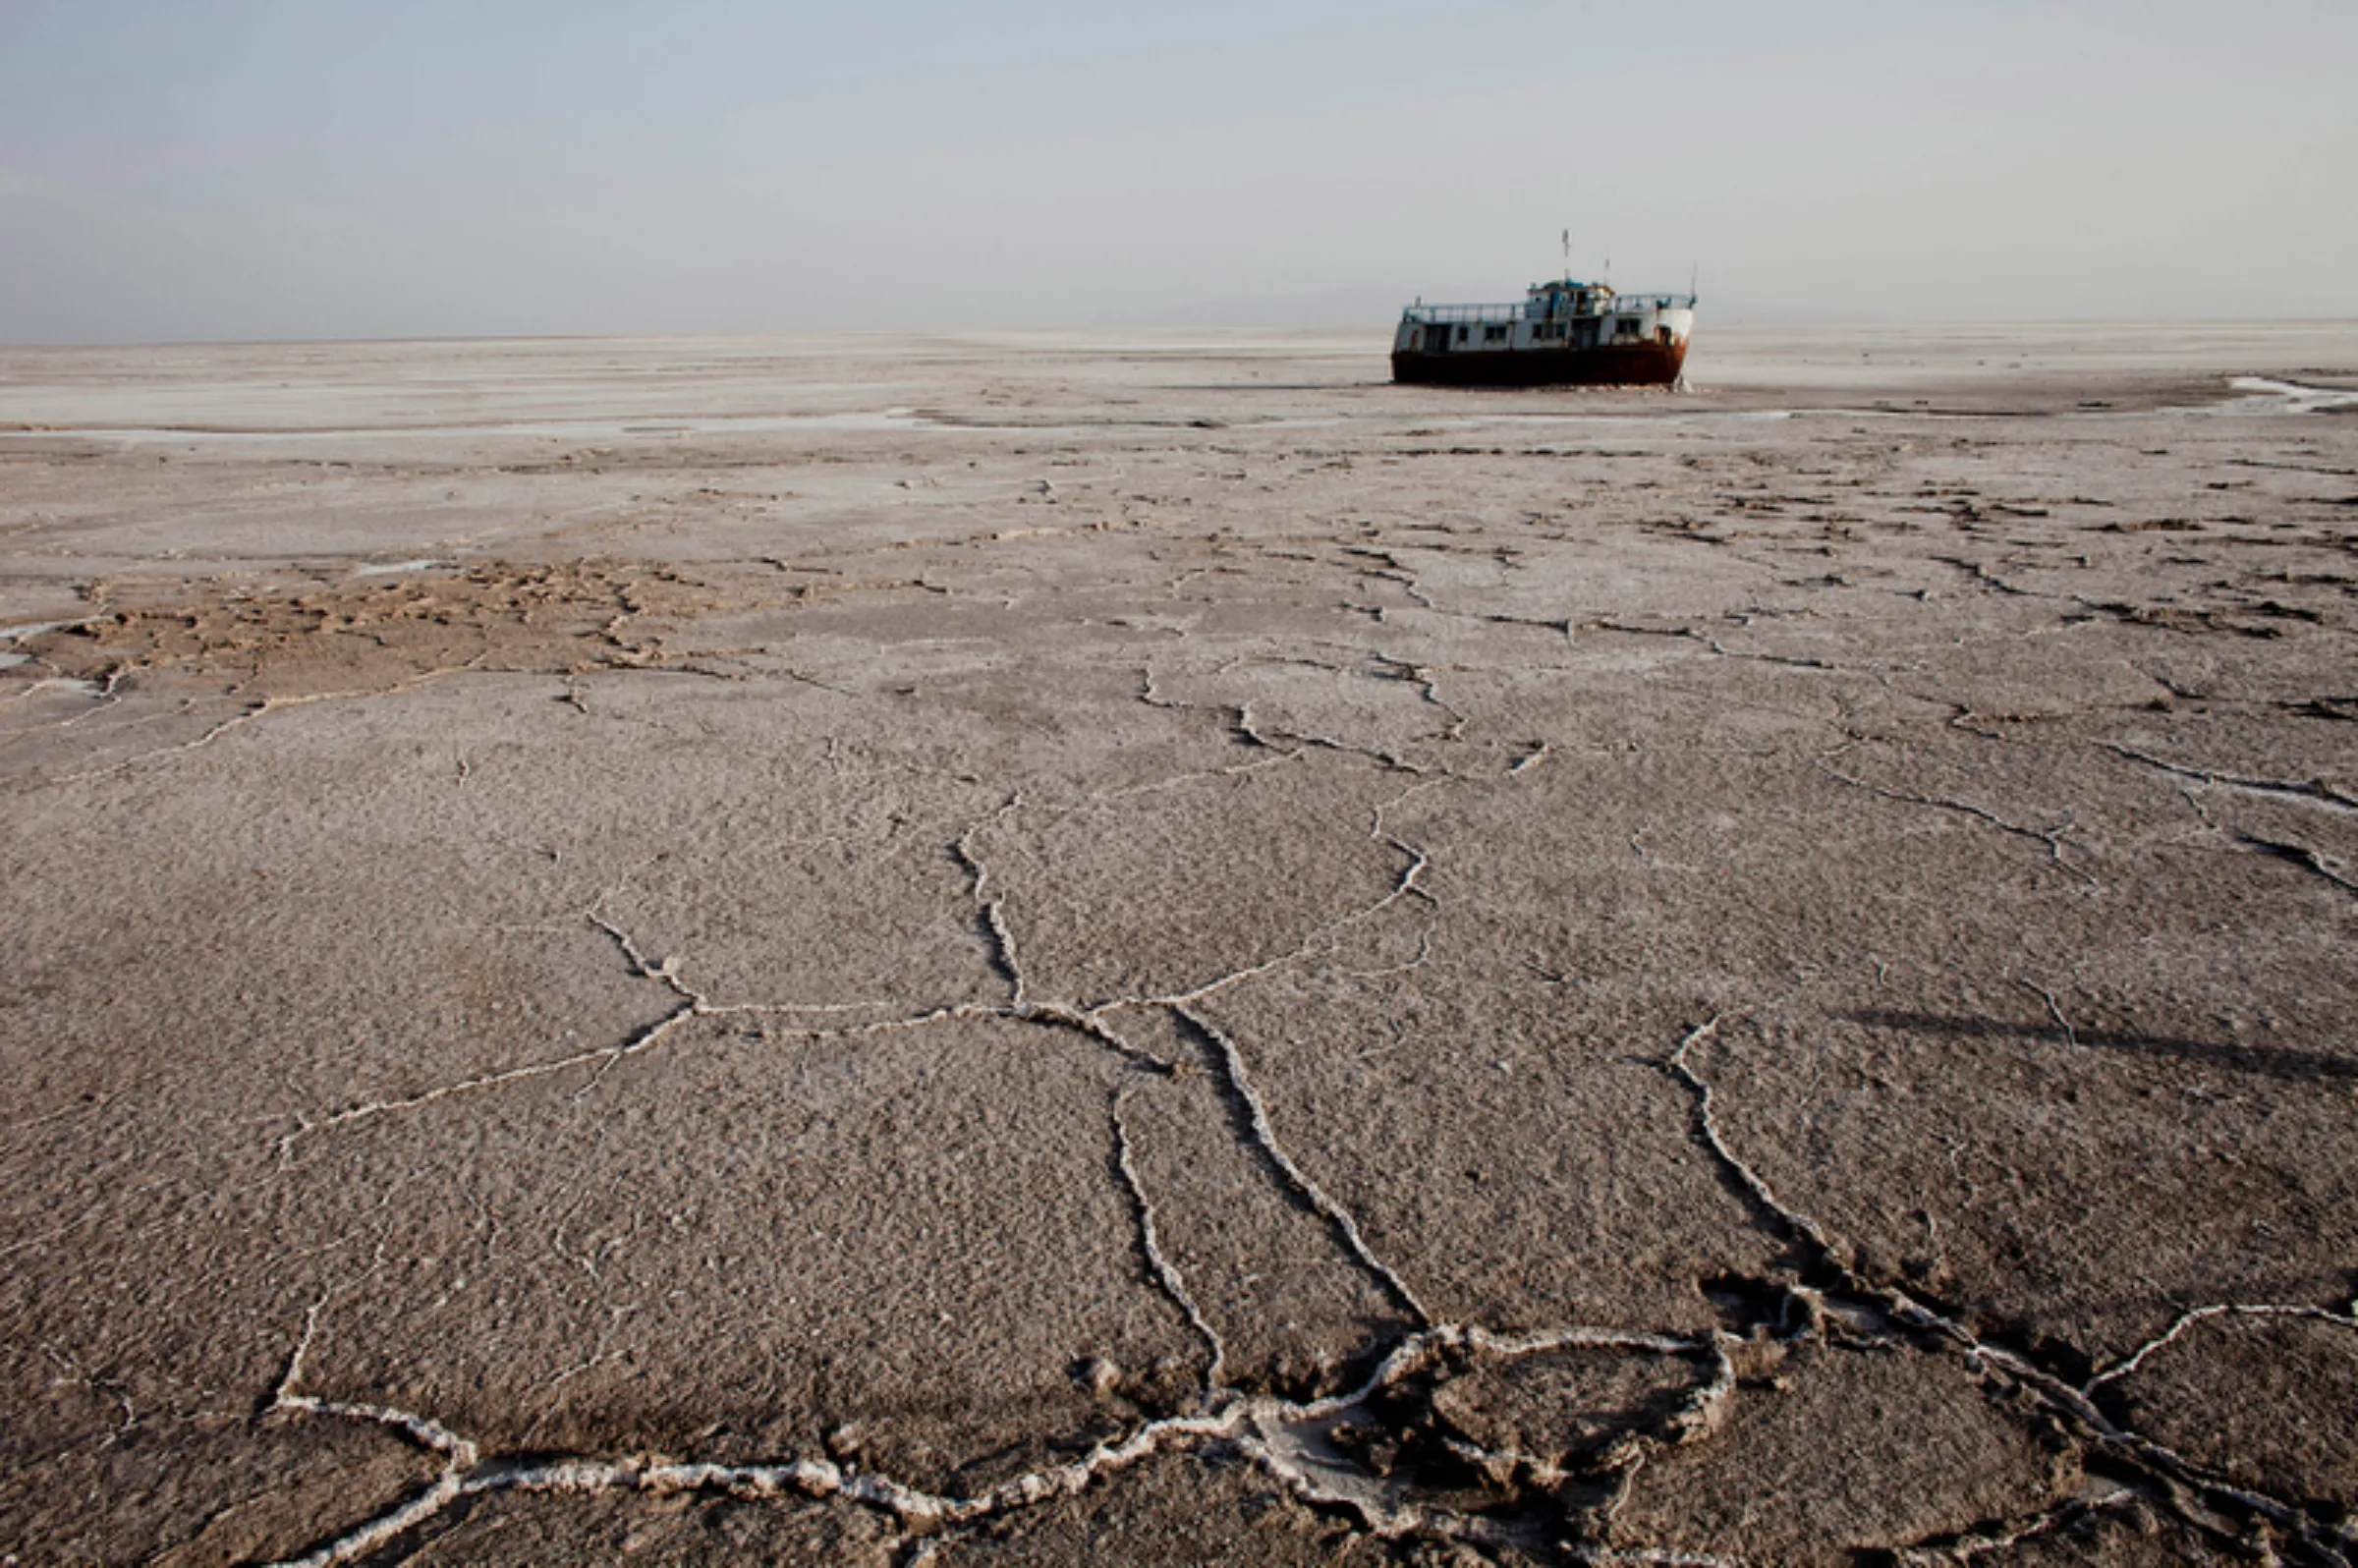 A ship lies stranded in the growing salt flats of drying Lake Urmia, in northwestern Iran, August 18, 2012